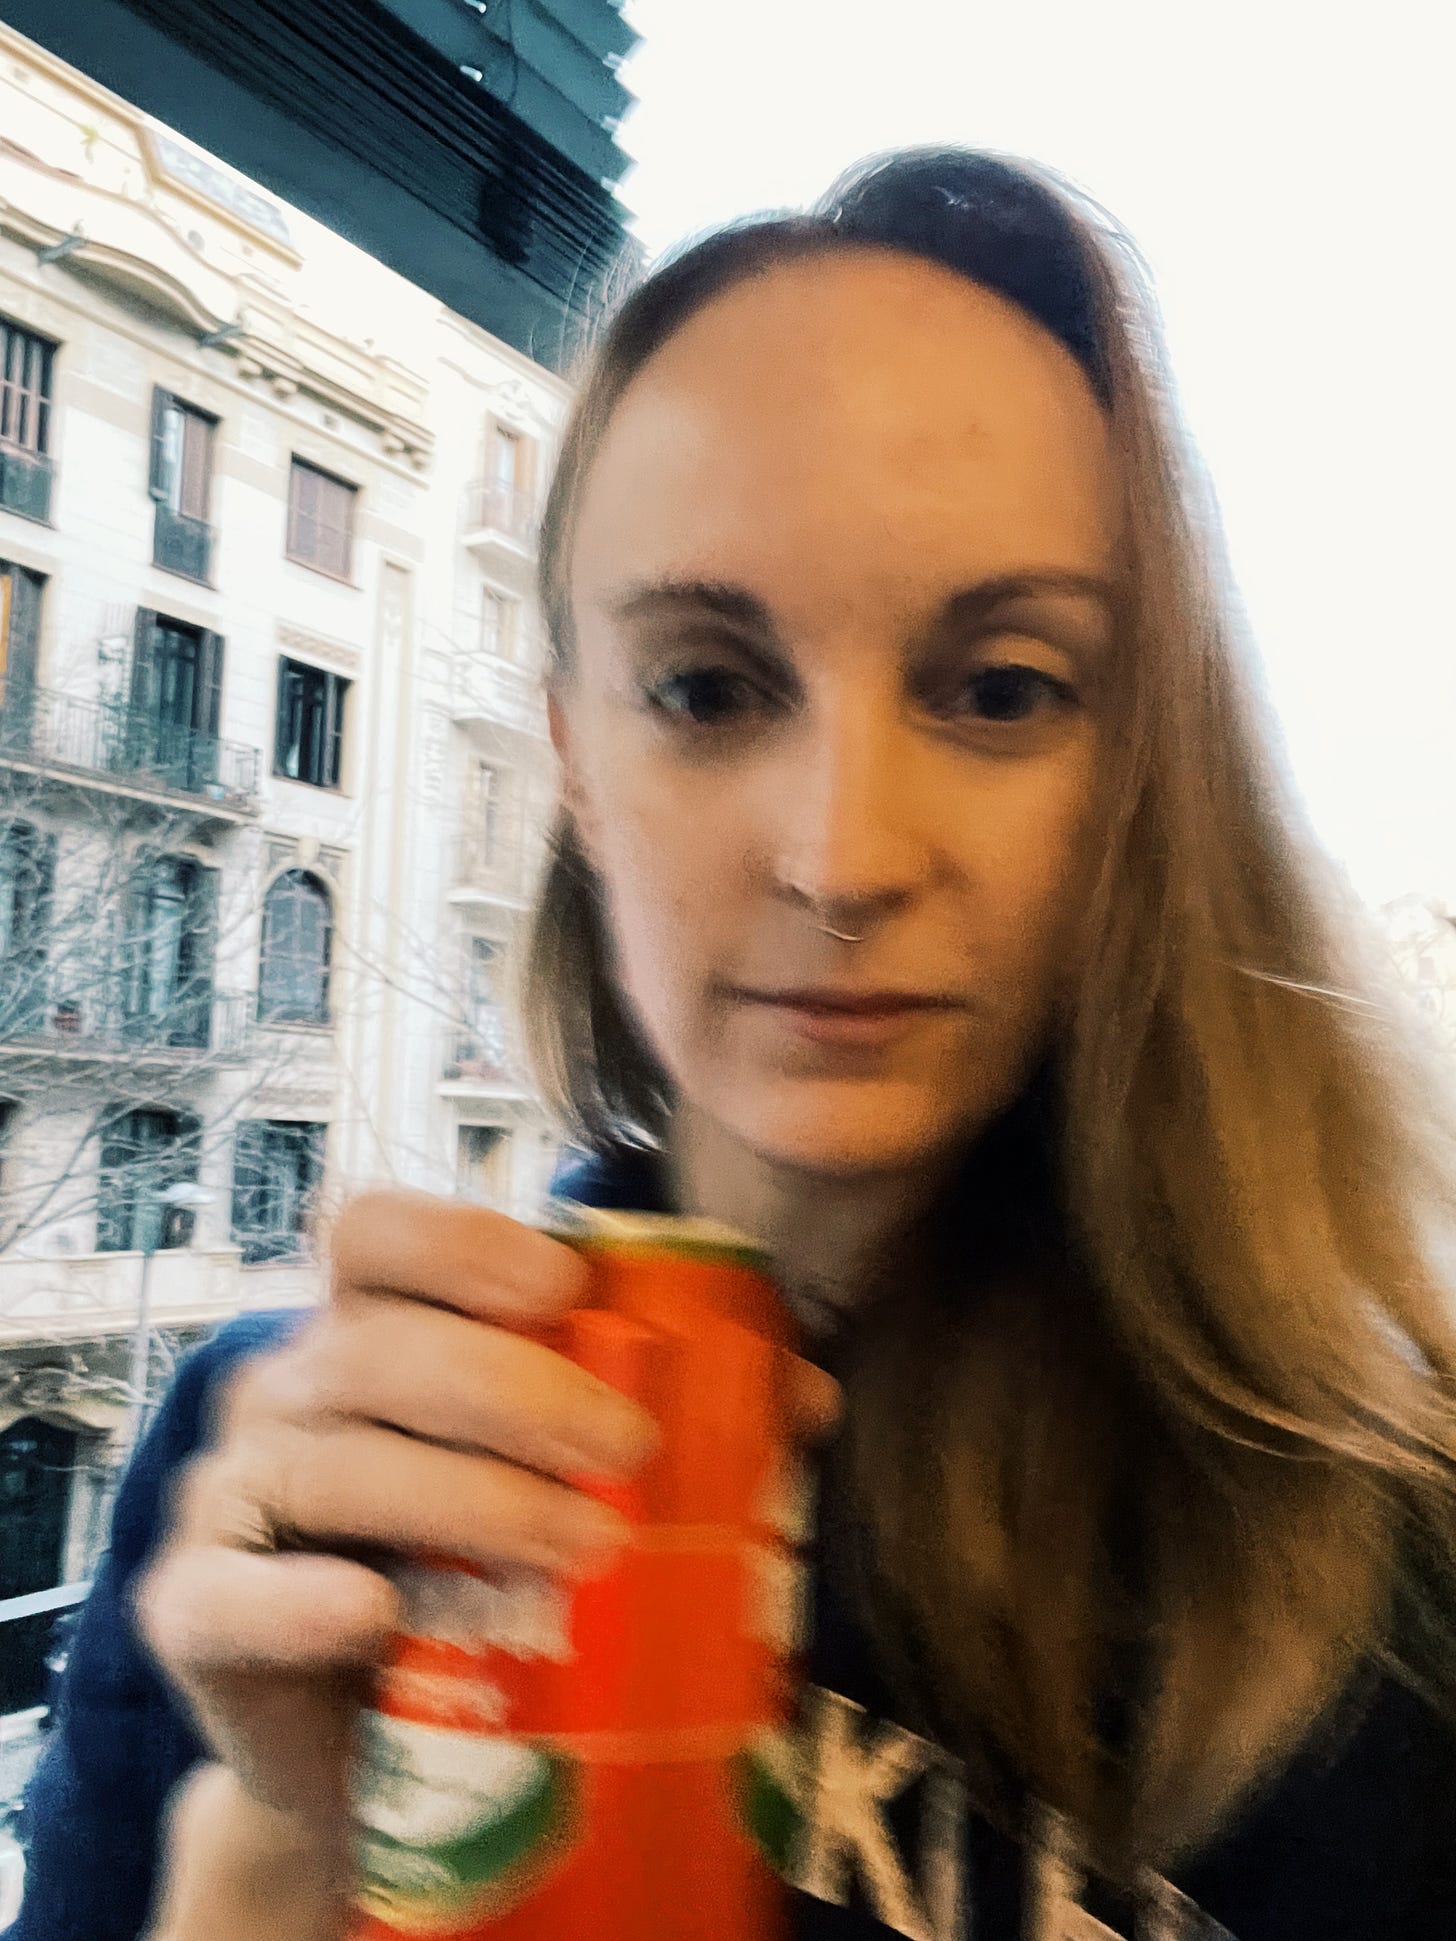 Selfie of the writer holding a can of beer on a balcony. Image is blurry on purpose because that is what is cool now.